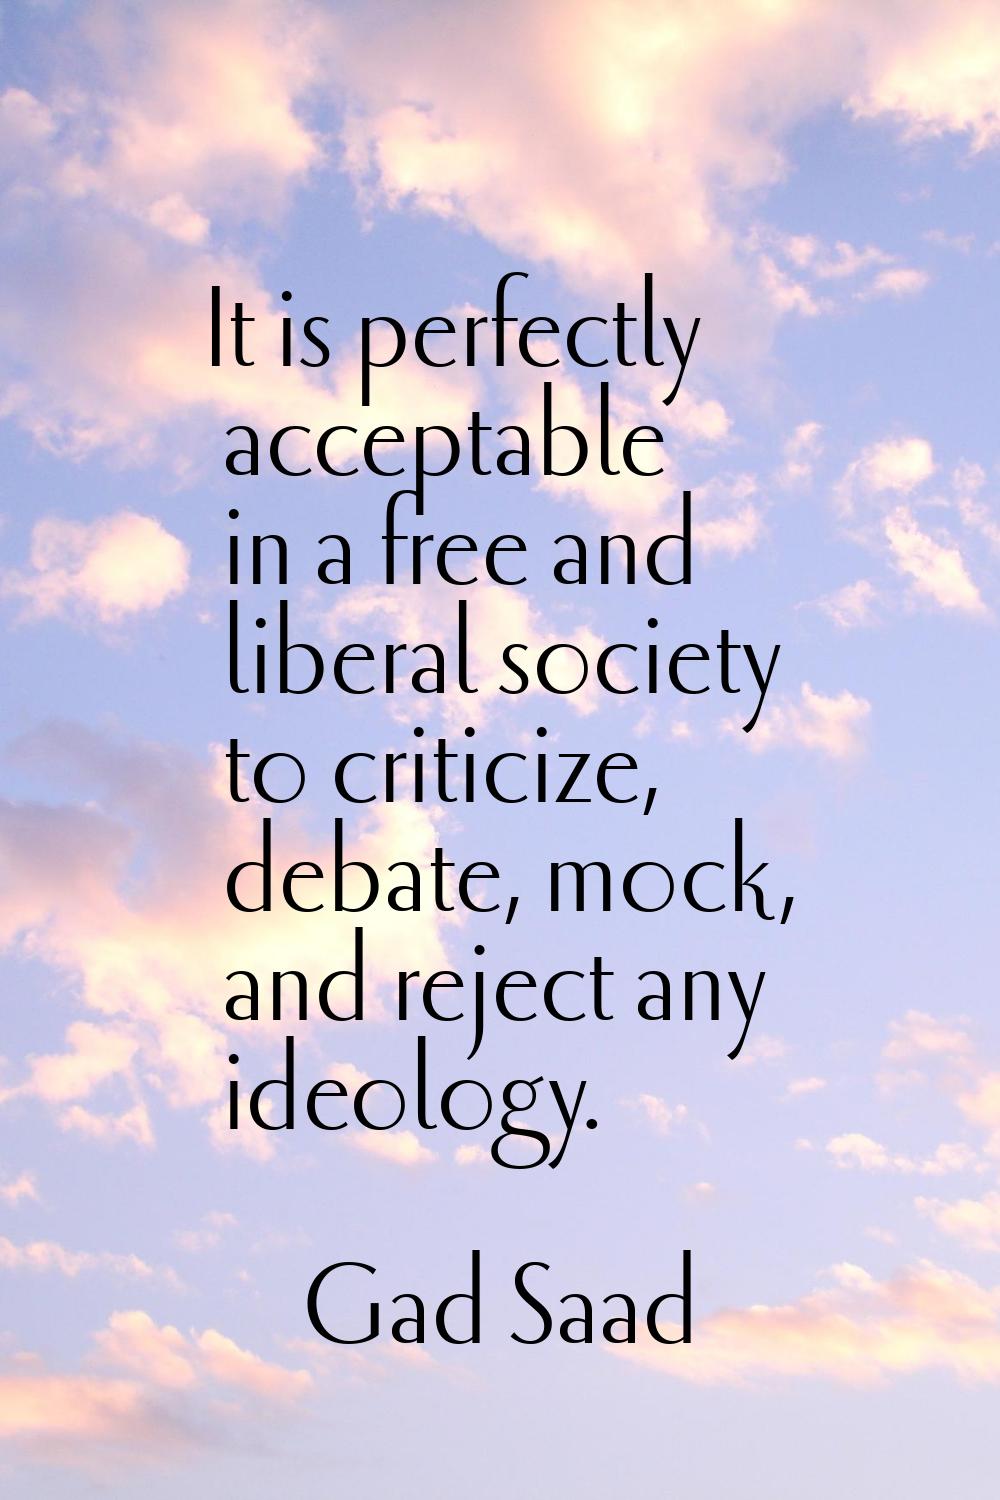 It is perfectly acceptable in a free and liberal society to criticize, debate, mock, and reject any